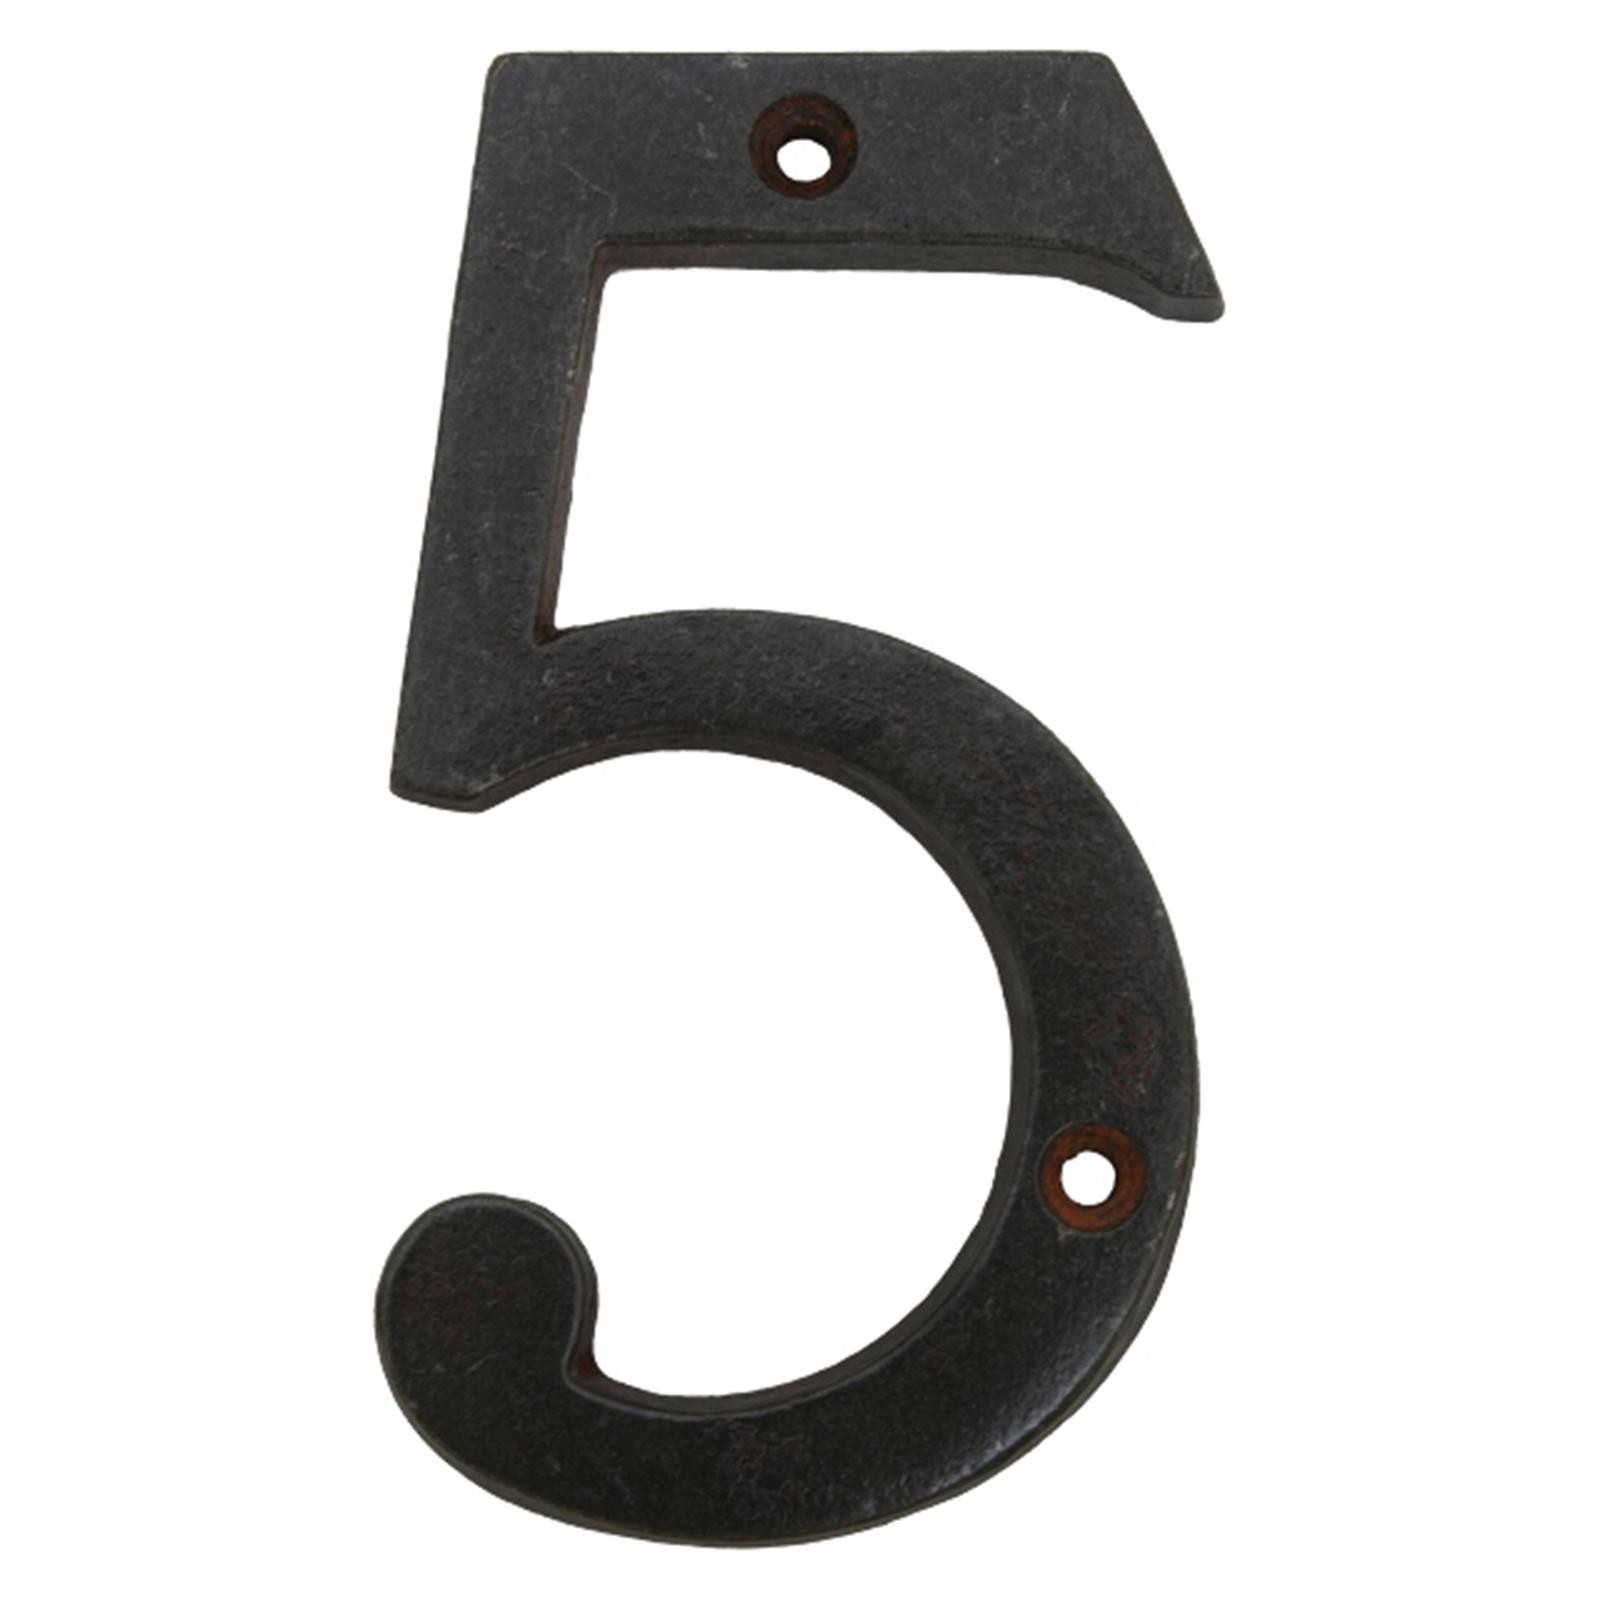 Antique black iron house number 5 house home luxury-pure Shop Door ...